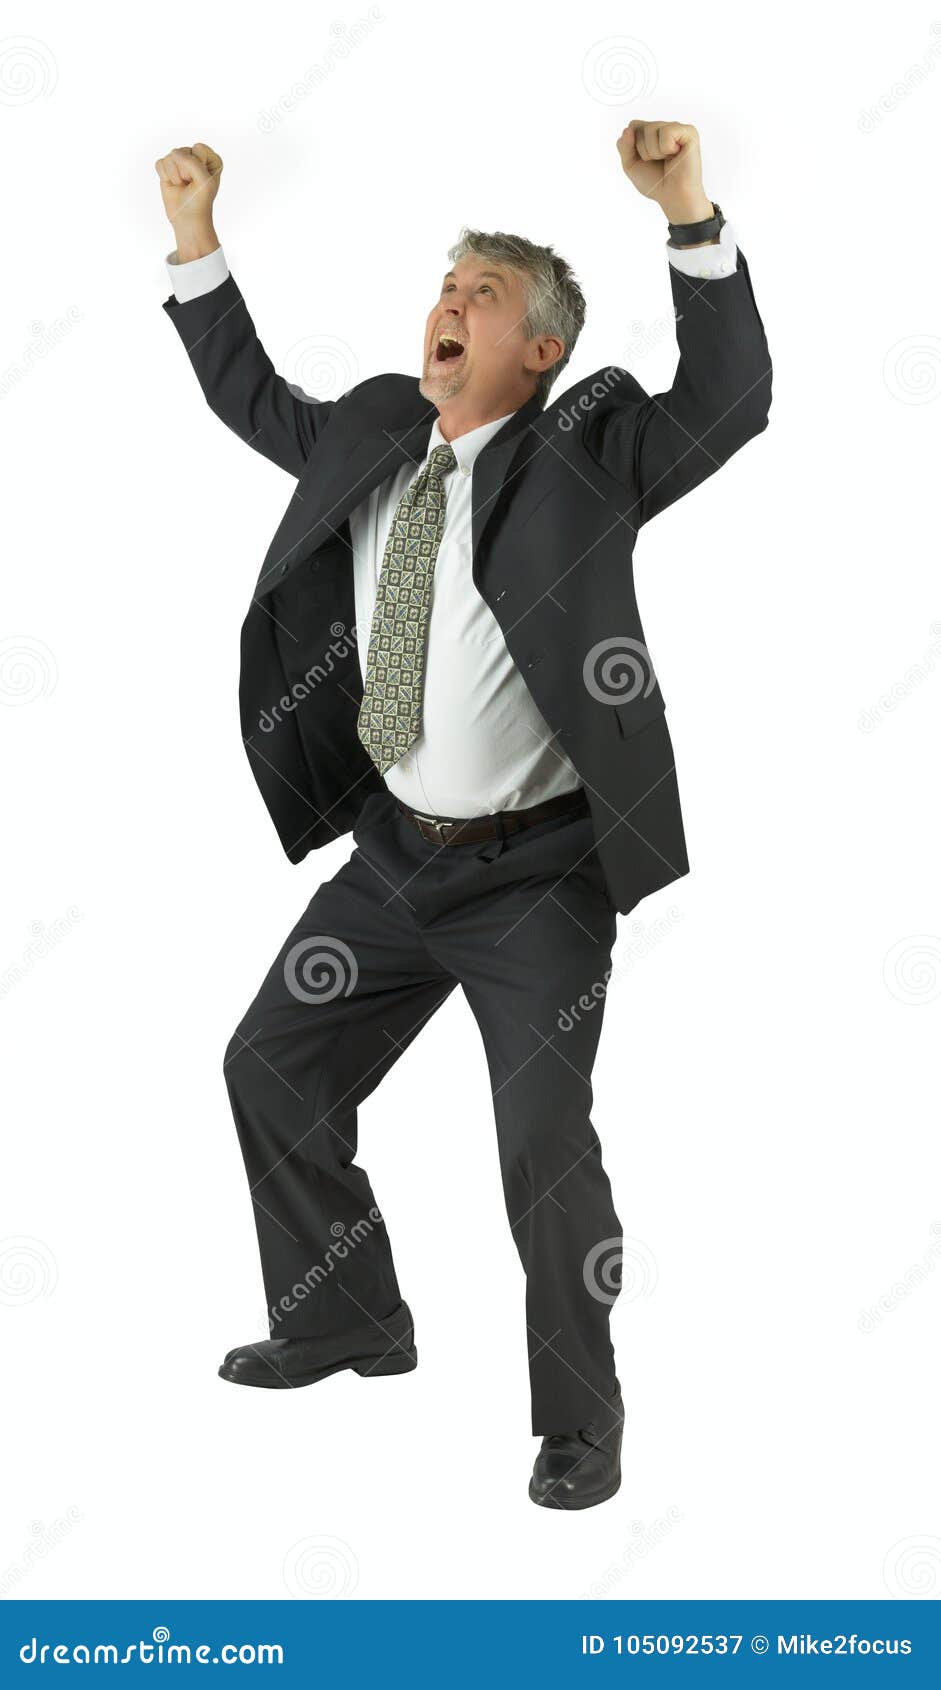 extremely happy man in suit smiling with arms raised victoriously